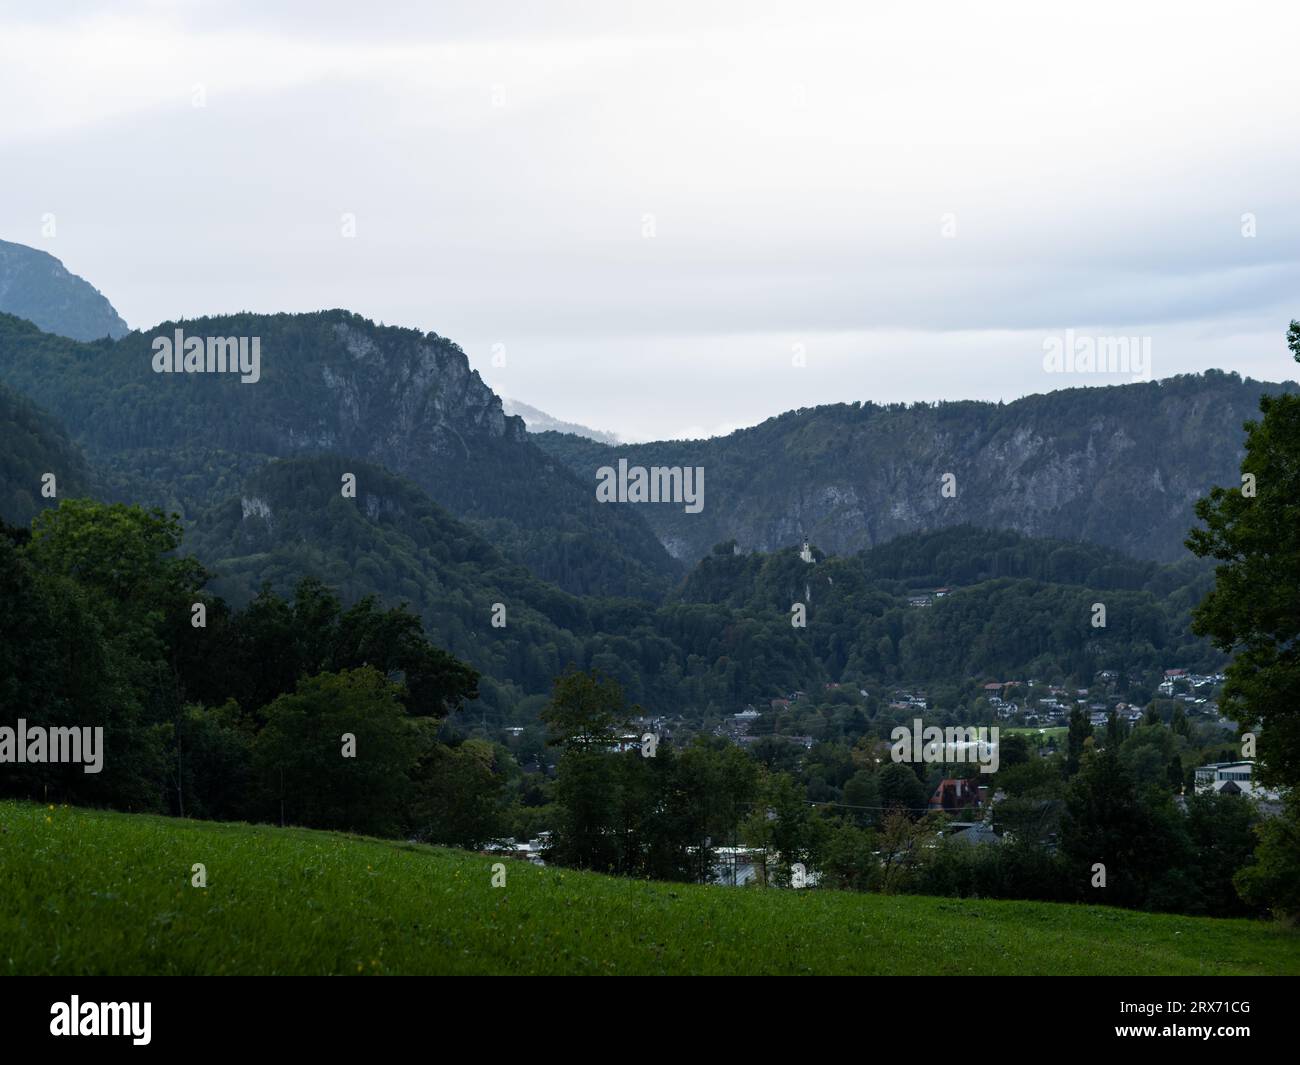 Mountain landscape in Bad Reichenhall in Bavaria, Germany. Small town in the valley surrounded by the German Alps. Rainy weather and an overcast sky. Stock Photo